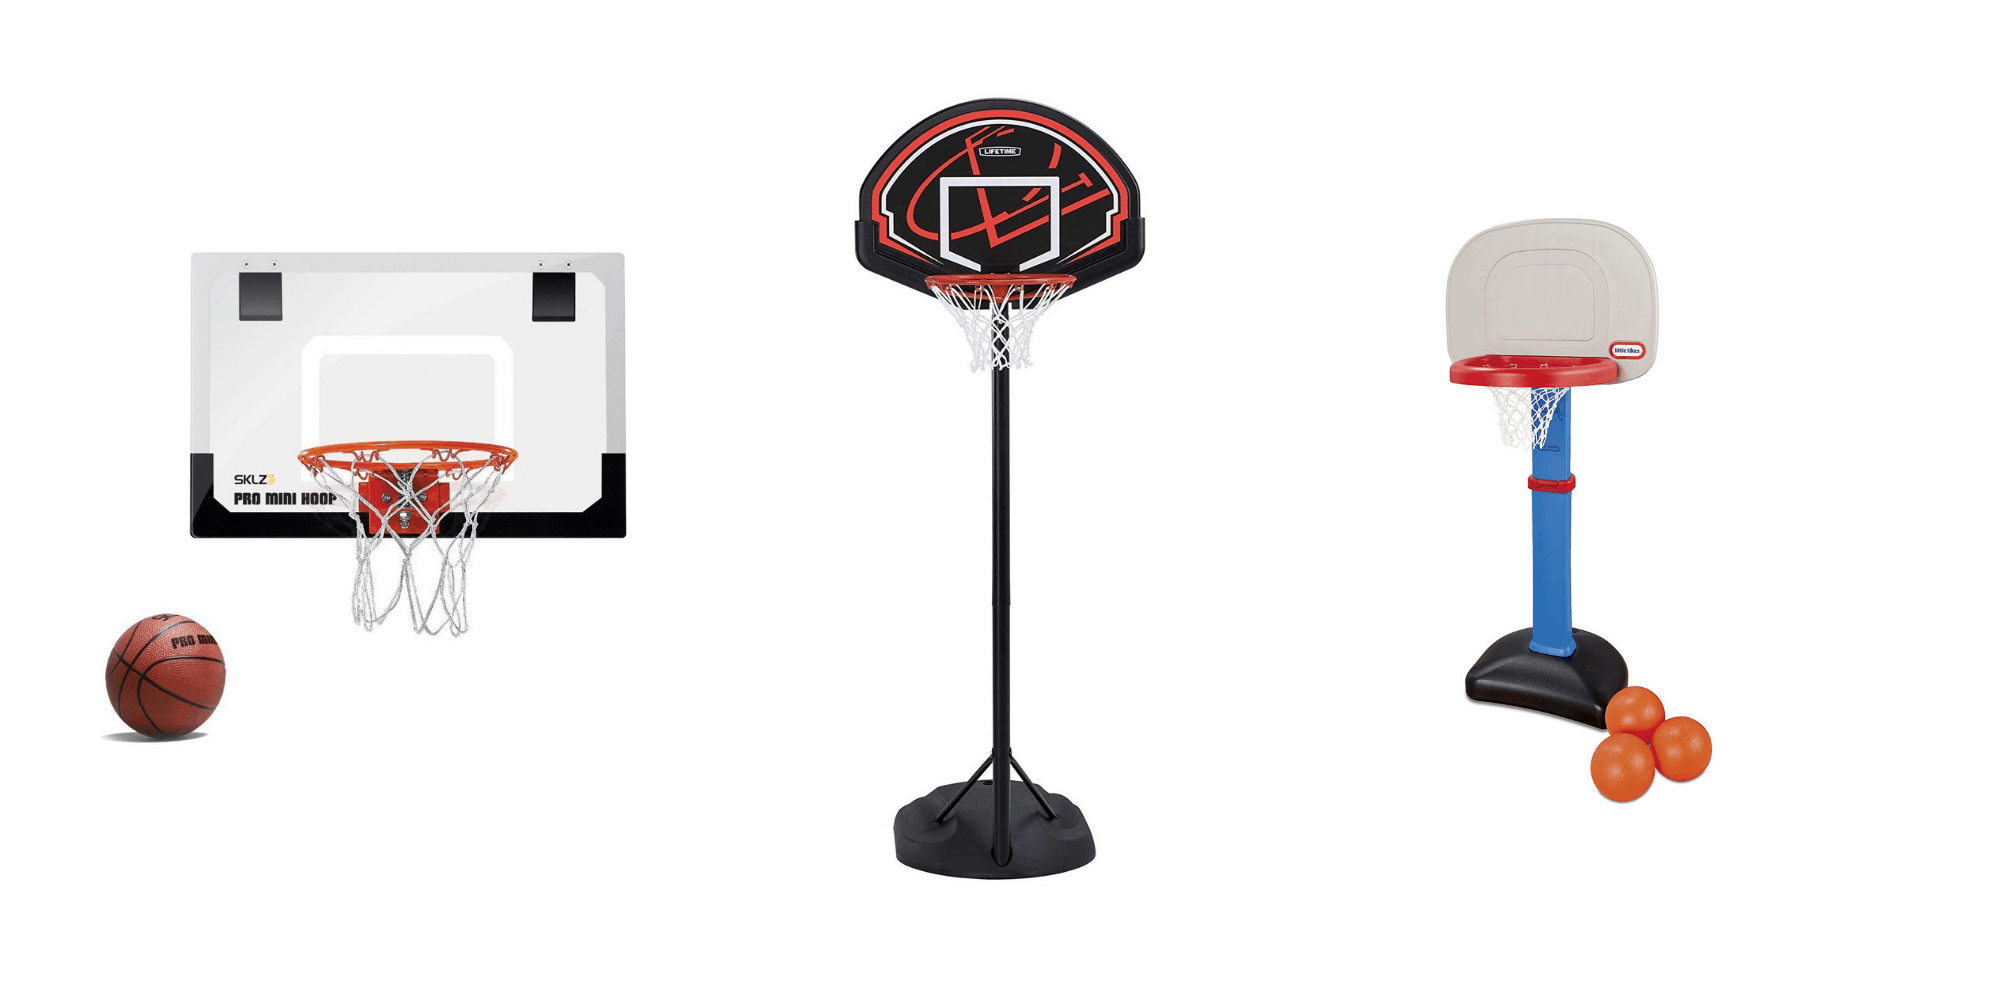 Wall Basketball Goal Indoor Rim Combo with Ball Pump Set for Toddler Kids Child Youth Boys Girls Teenagers Party Family Game YUOYING Basketball Hoop Over The Door 15x11.5 